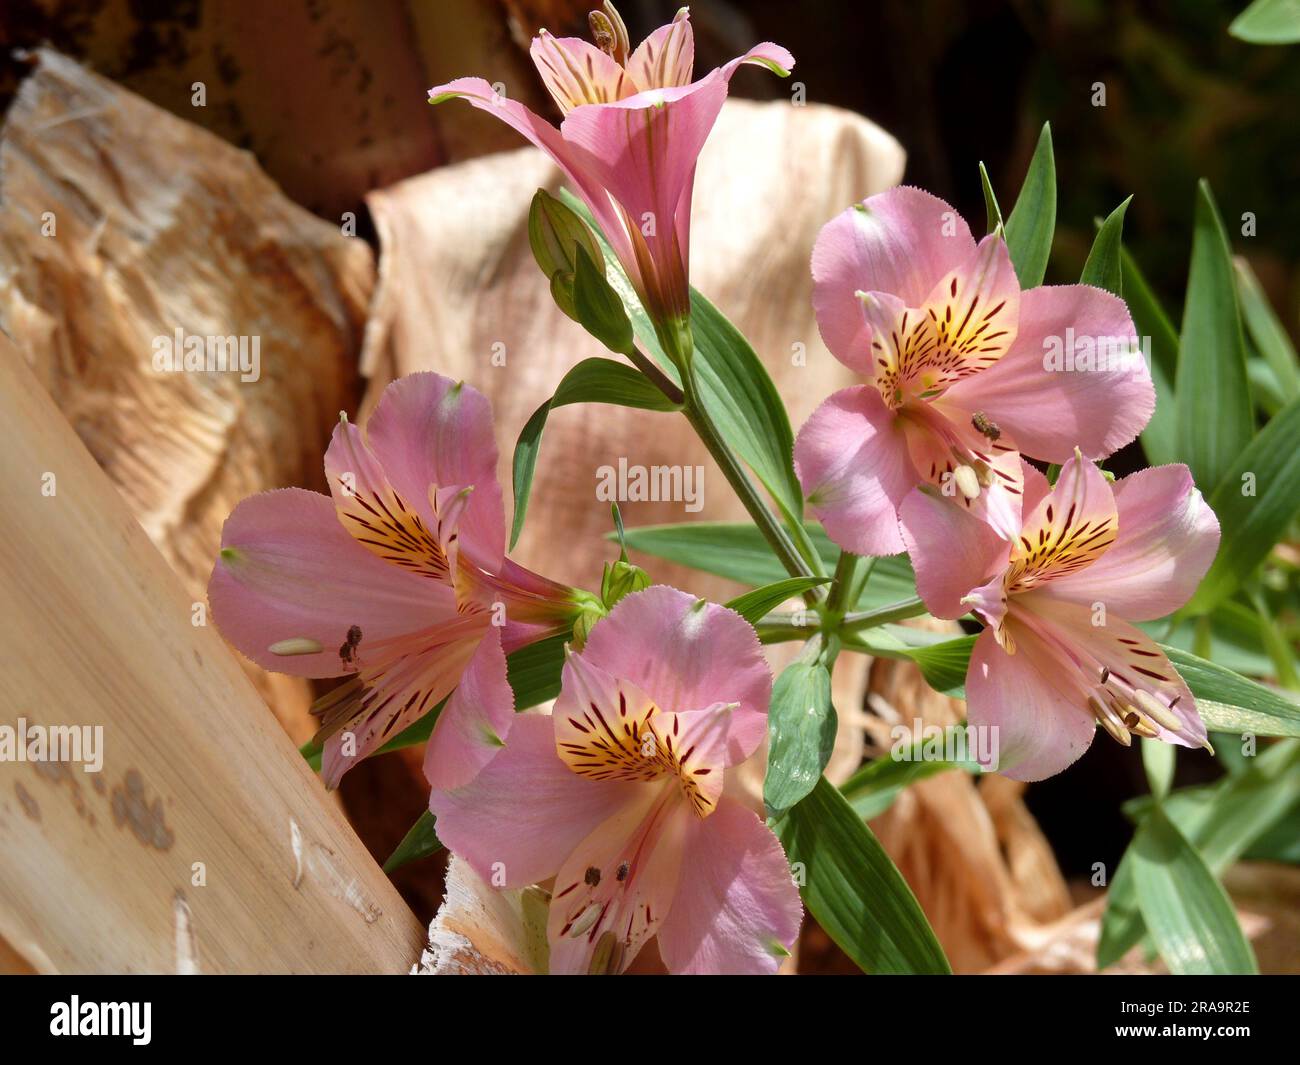 Wild growing pink exotic flower, inca lily (alstroemeria) in its natural environment, Tenerife, Canary Islands, Spain Stock Photo